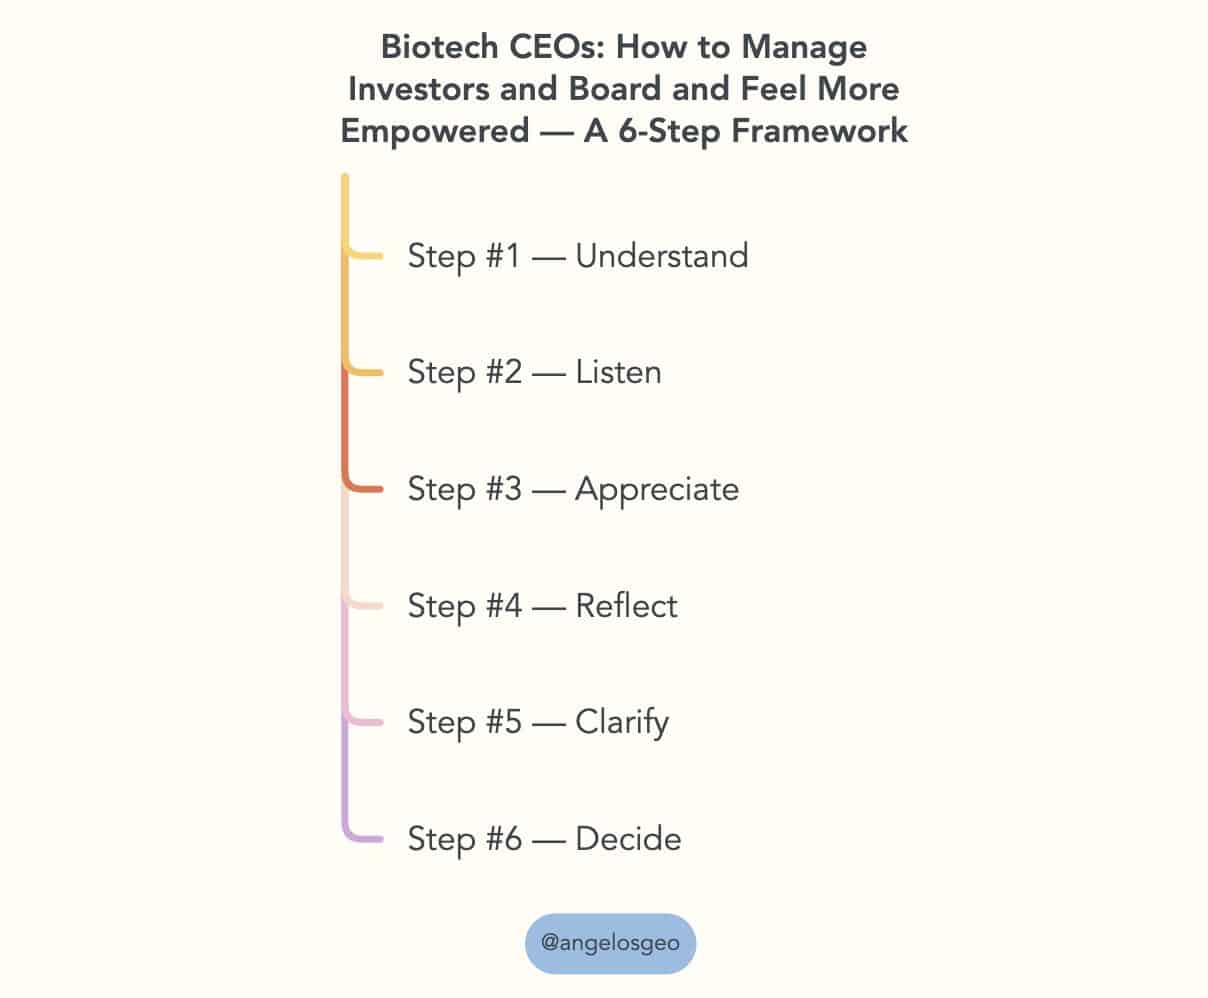 A 6-Step Framework on How to Manage your Board and Investors